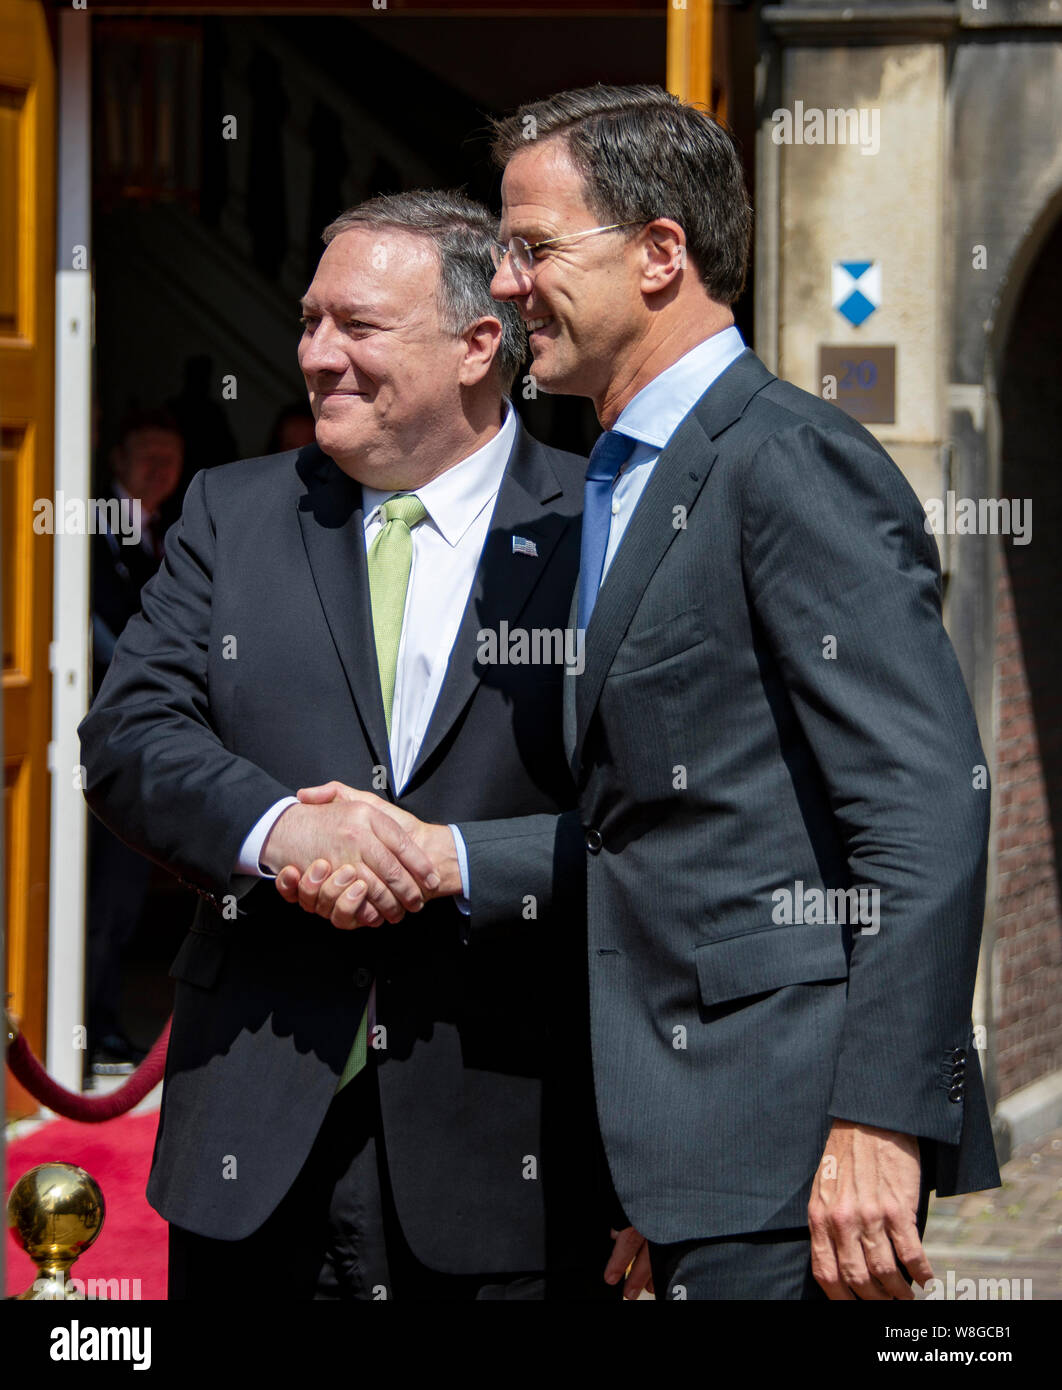 U.S. Secretary of State Michael R. Pompeo participates in a pull-aside with Prime Minister Mark Rutte in The Hague, the Netherlands on June 3, 2019. Stock Photo